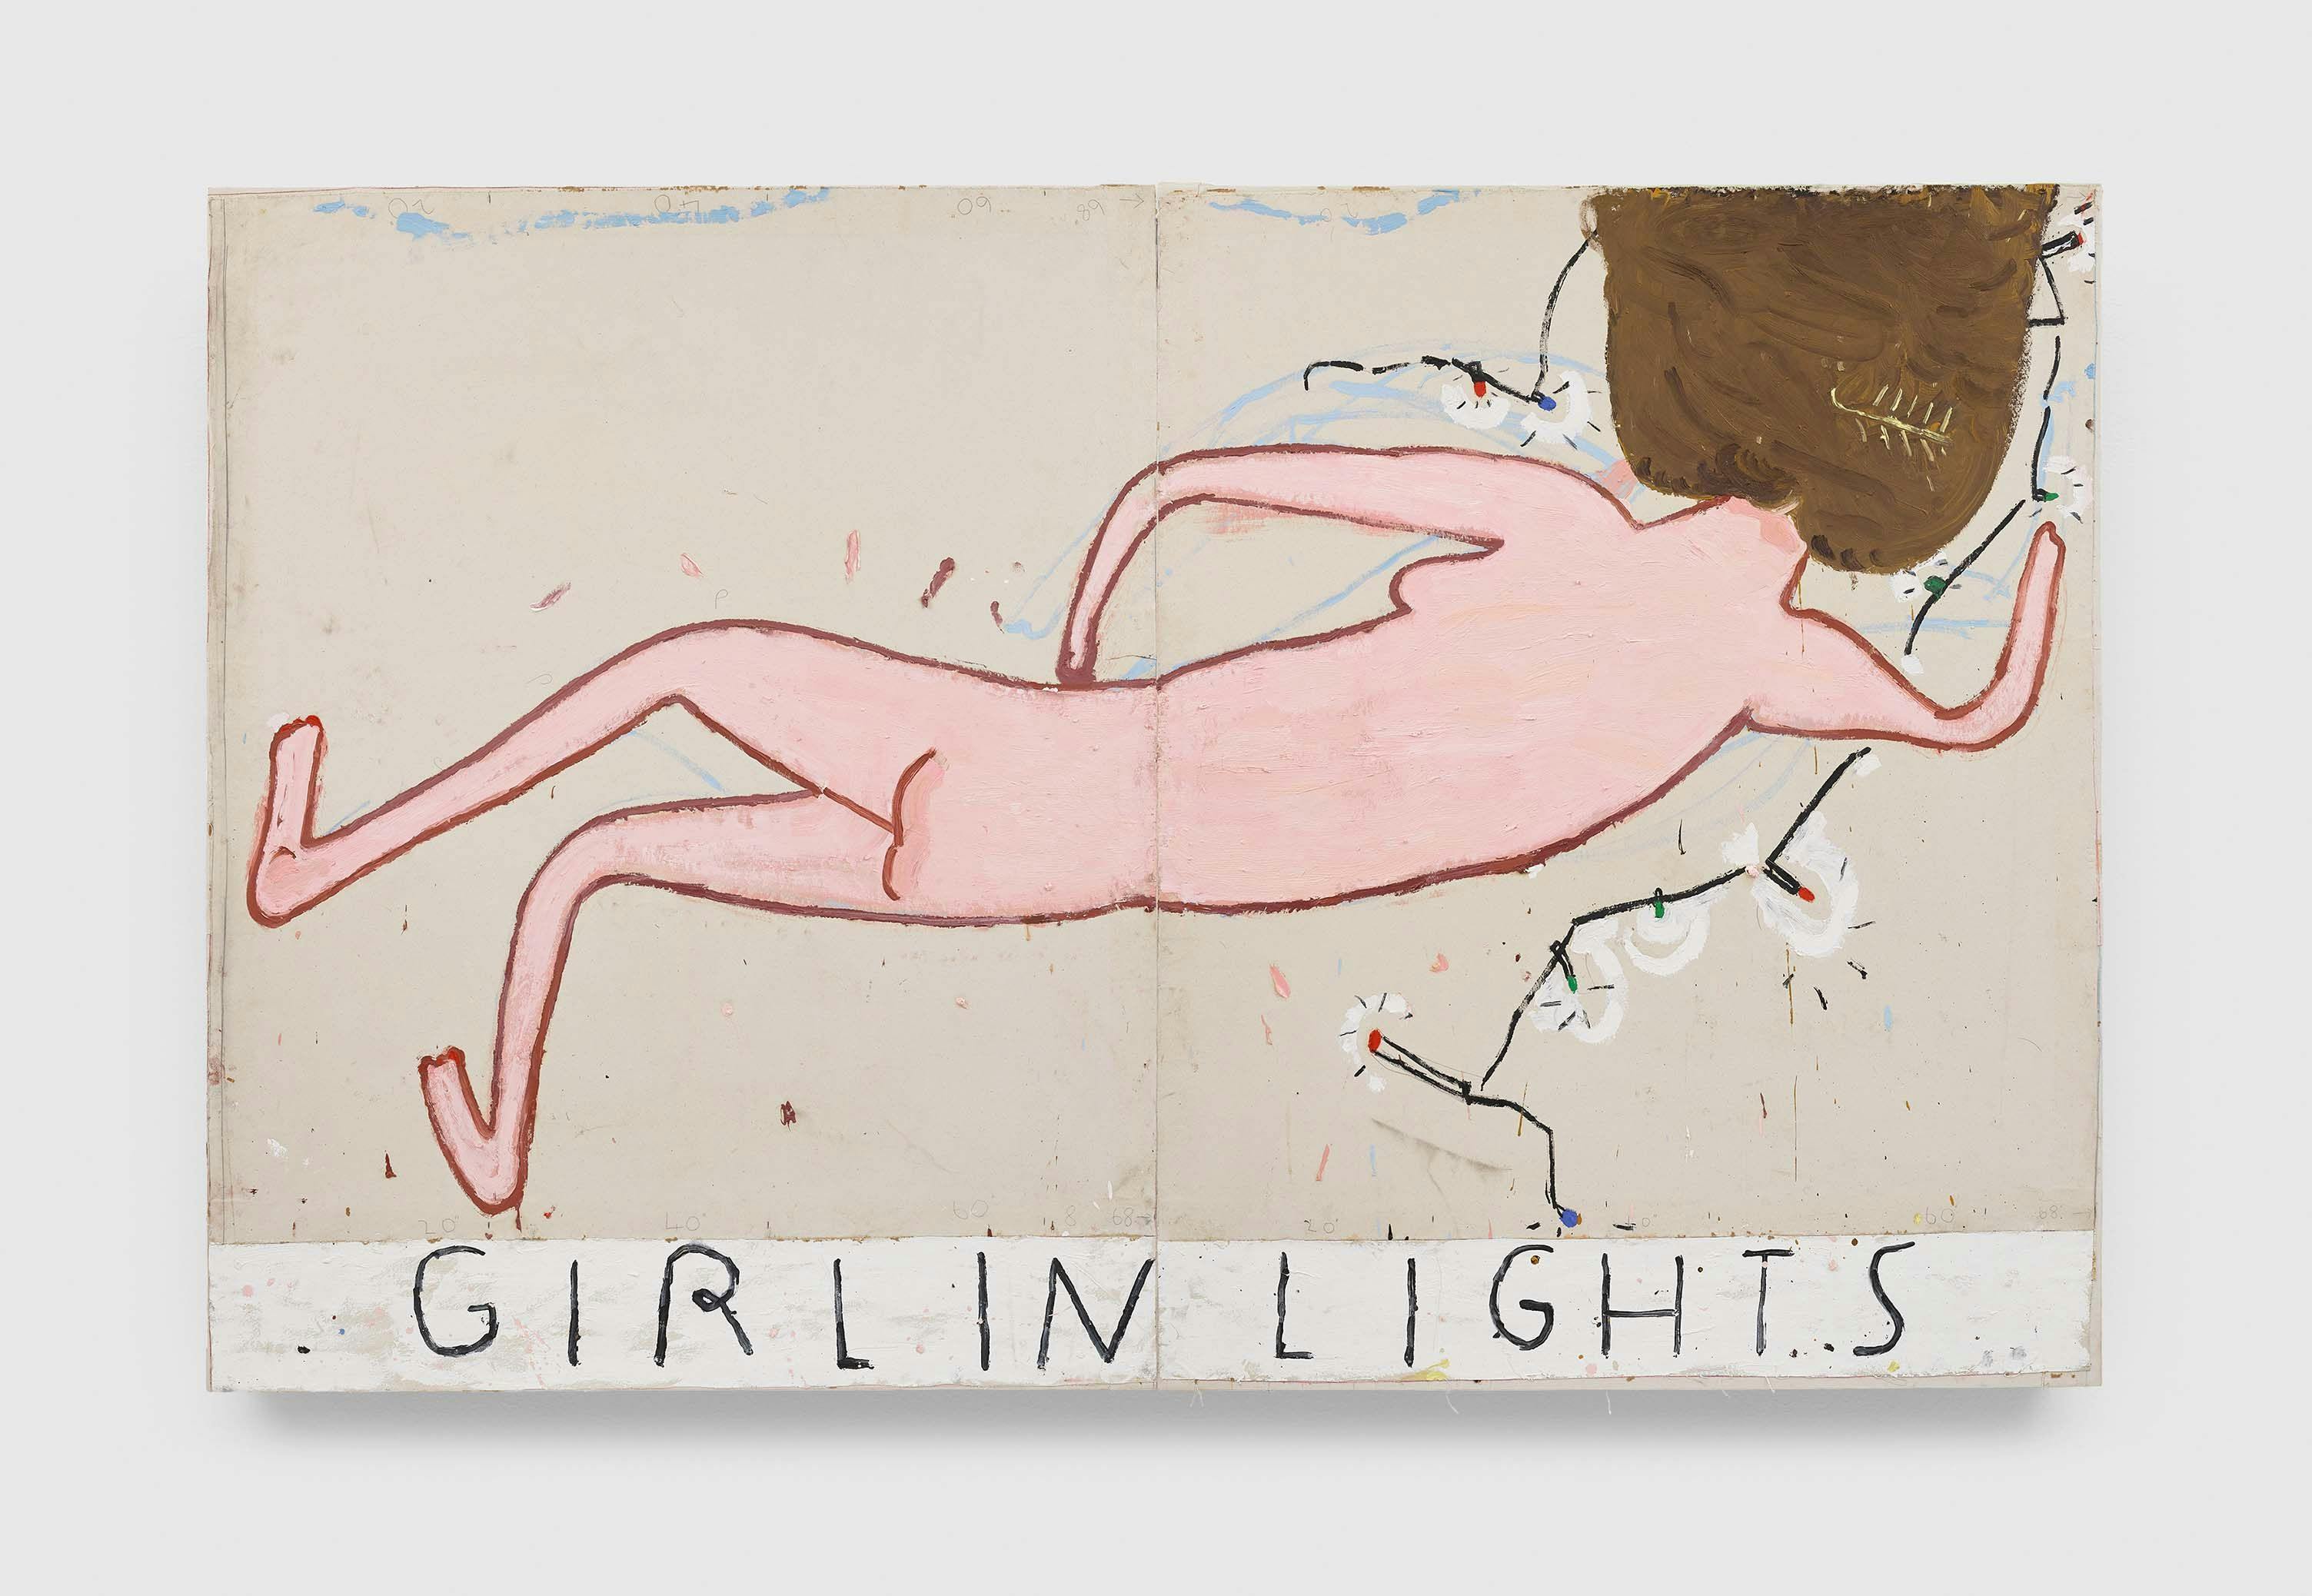 A painting by Rose Wylie, titled Girl in Lights, dated 2015.